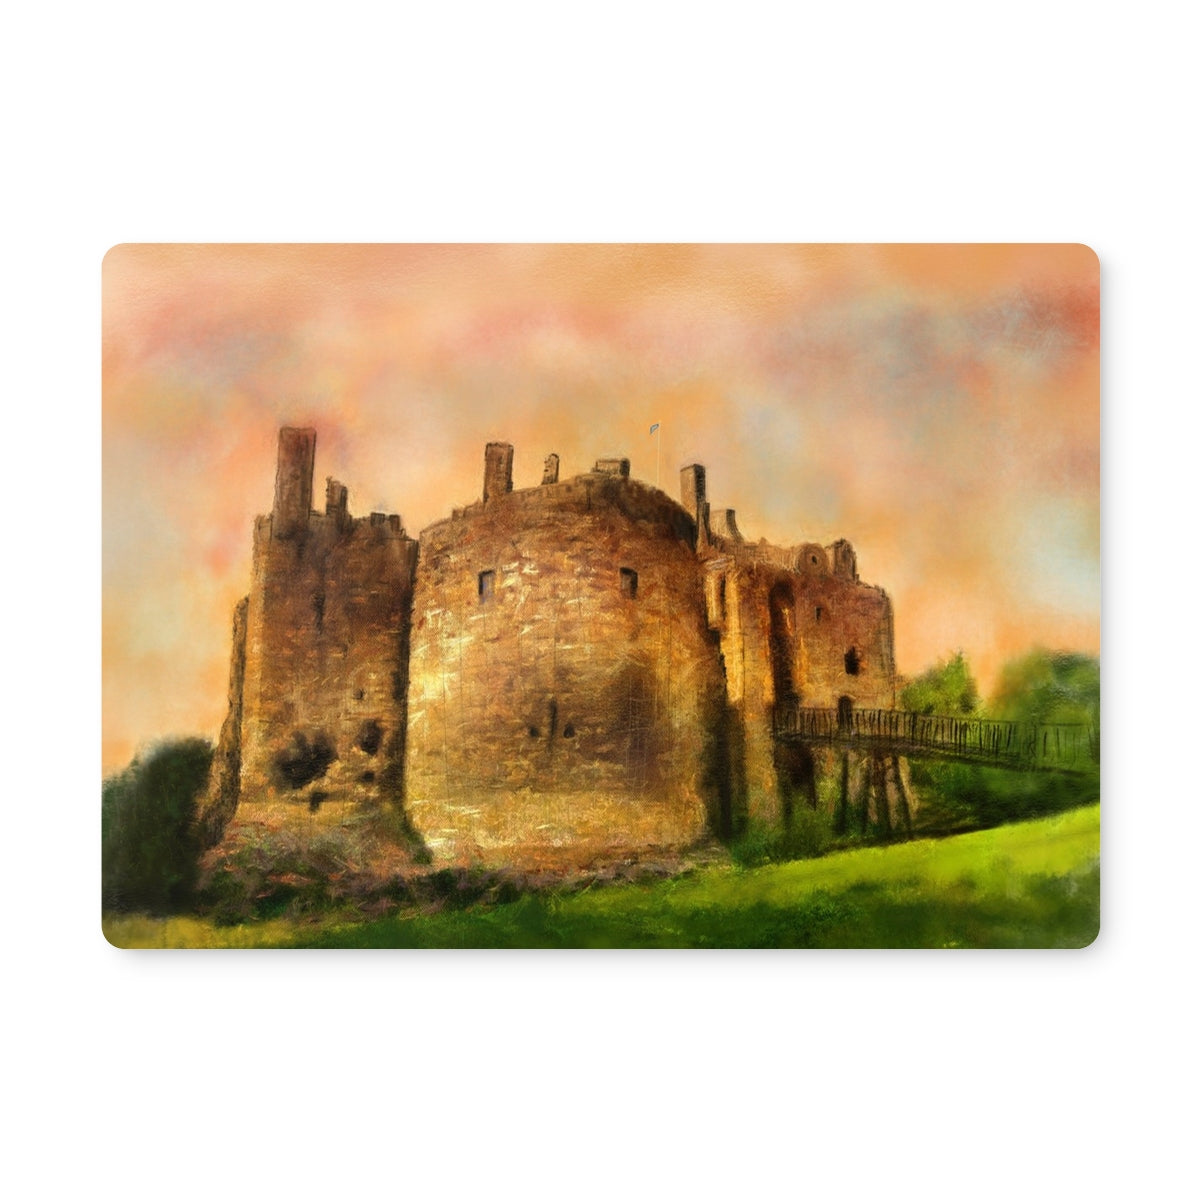 Dirleton Castle Art Gifts Placemat-Homeware-Prodigi-2 Placemats-Paintings, Prints, Homeware, Art Gifts From Scotland By Scottish Artist Kevin Hunter